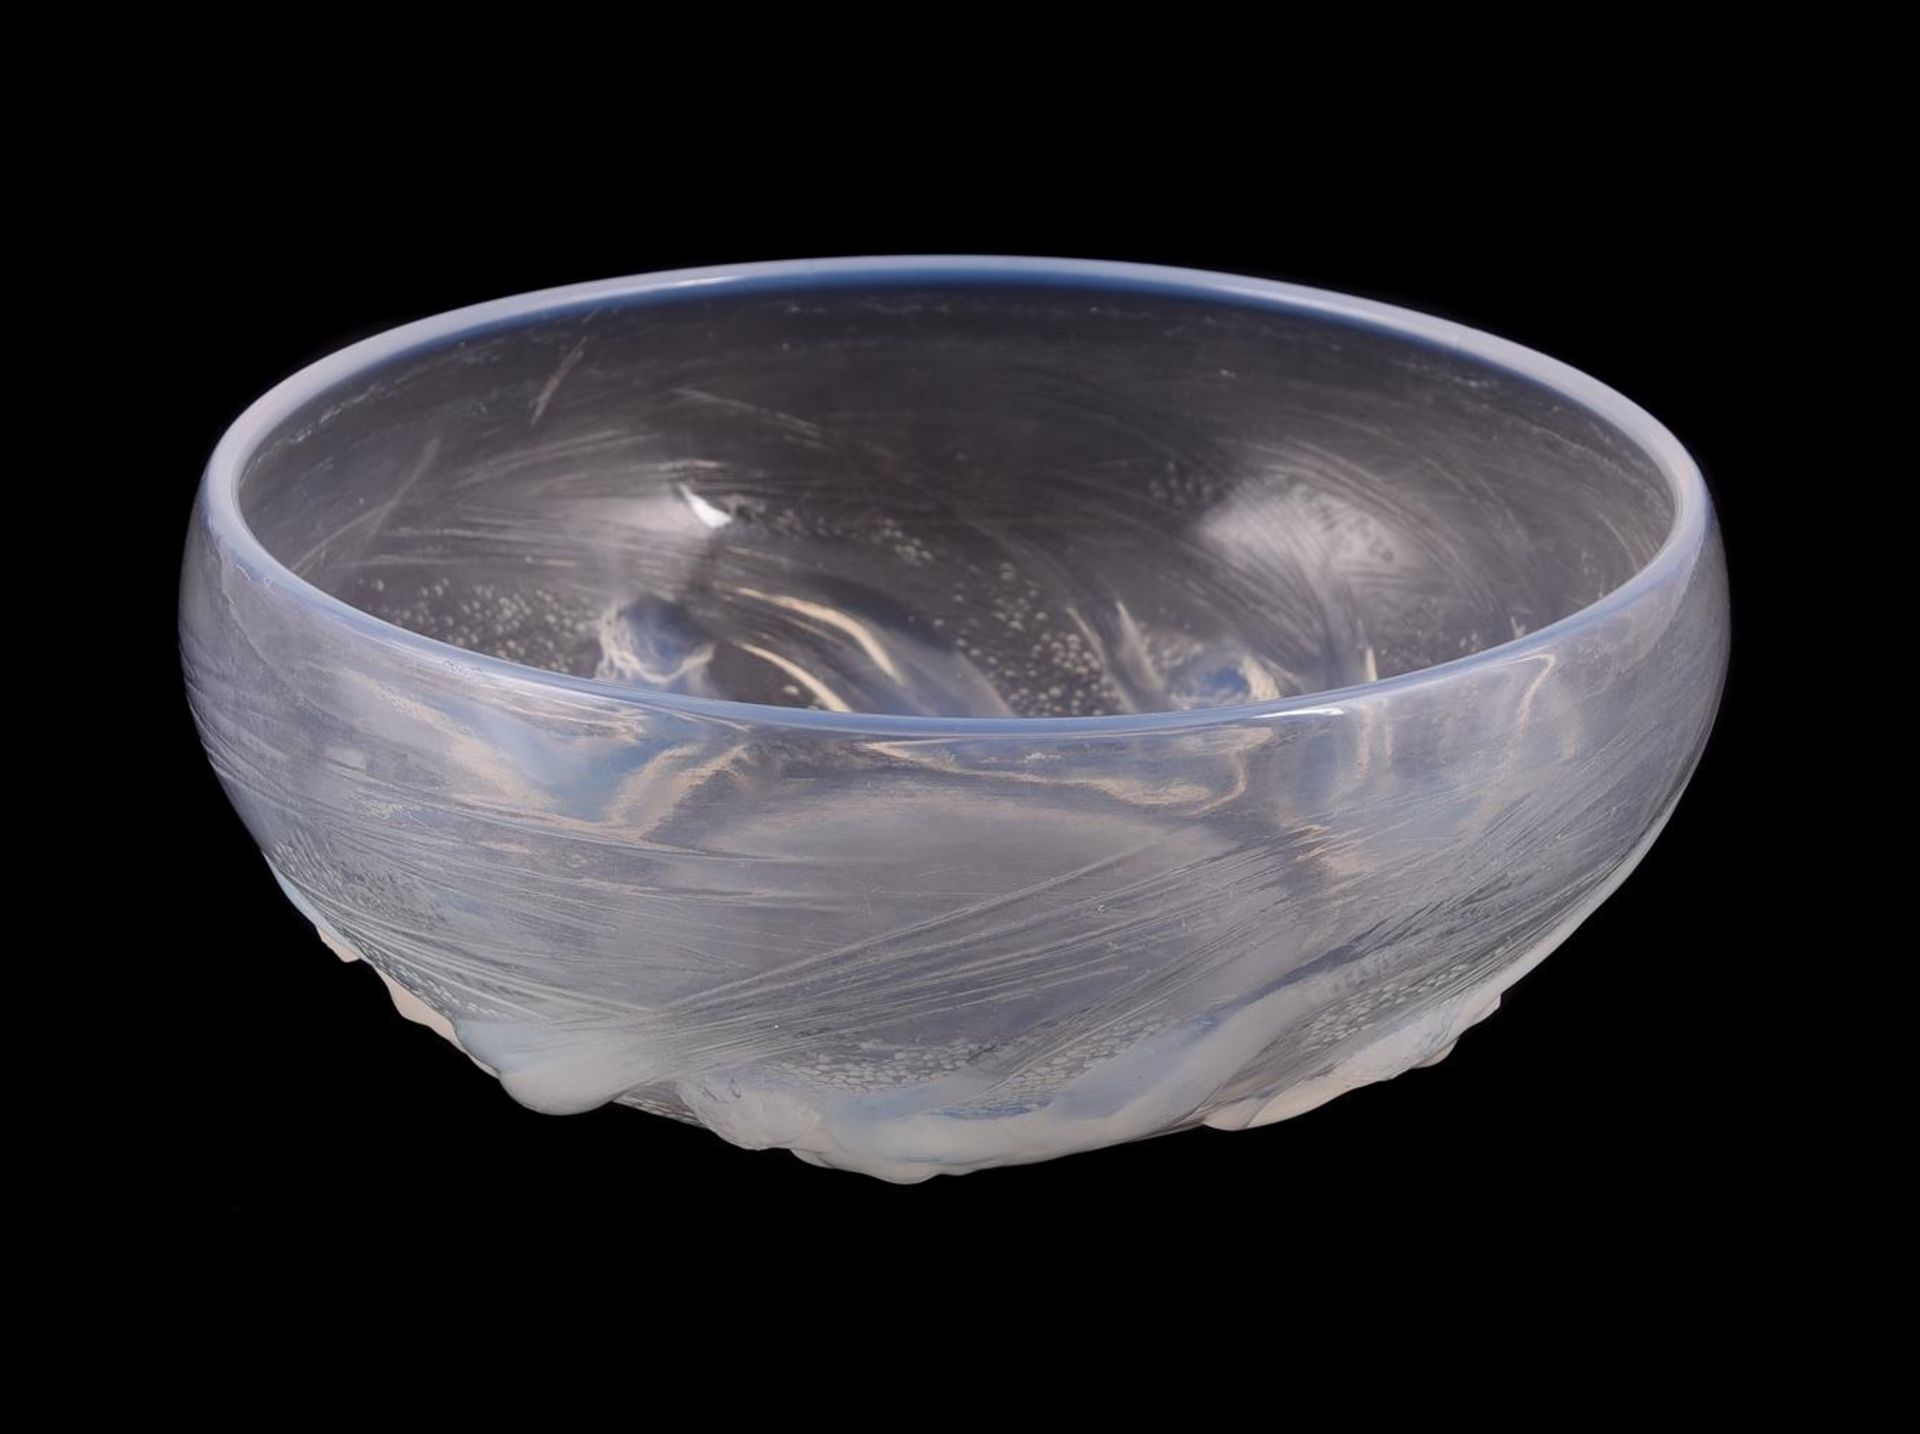 LALIQUE, RENE LALIQUE, CALYPSO, AN OPALESCENT GLASS BOWL - Image 2 of 2